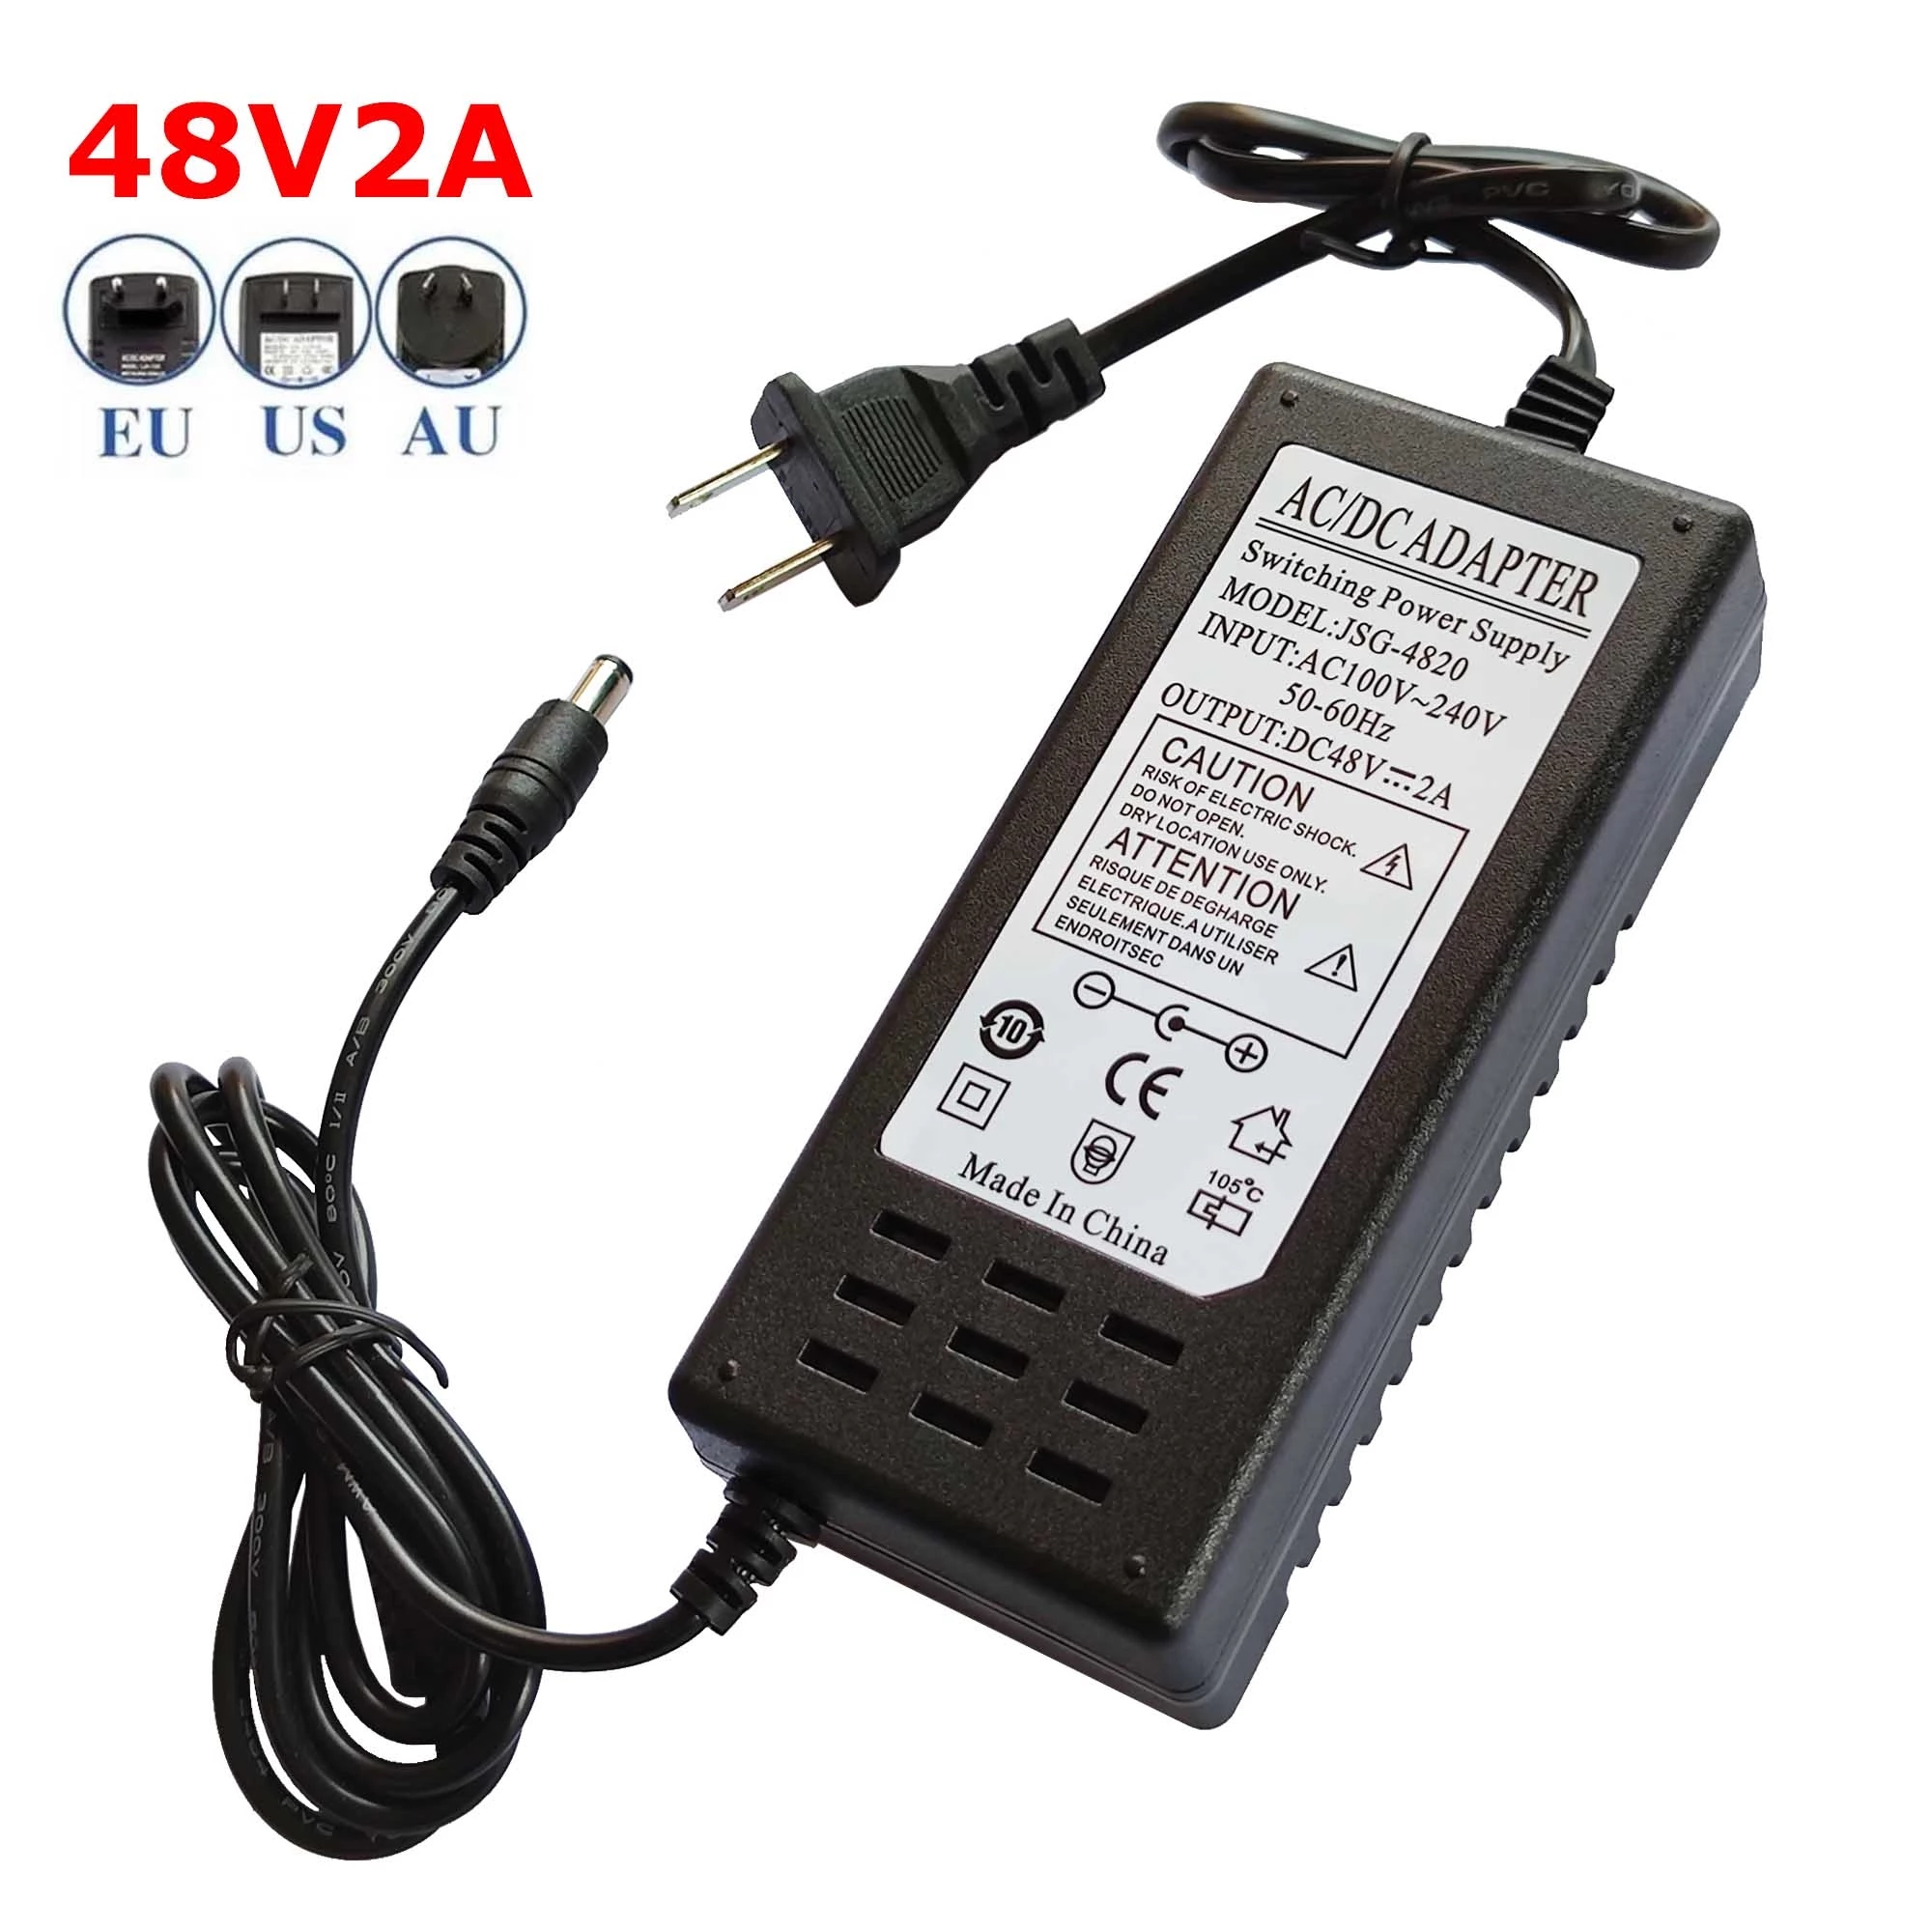 48V 2A Power Adapter for Networking Switch Power Supply – AdapterKart